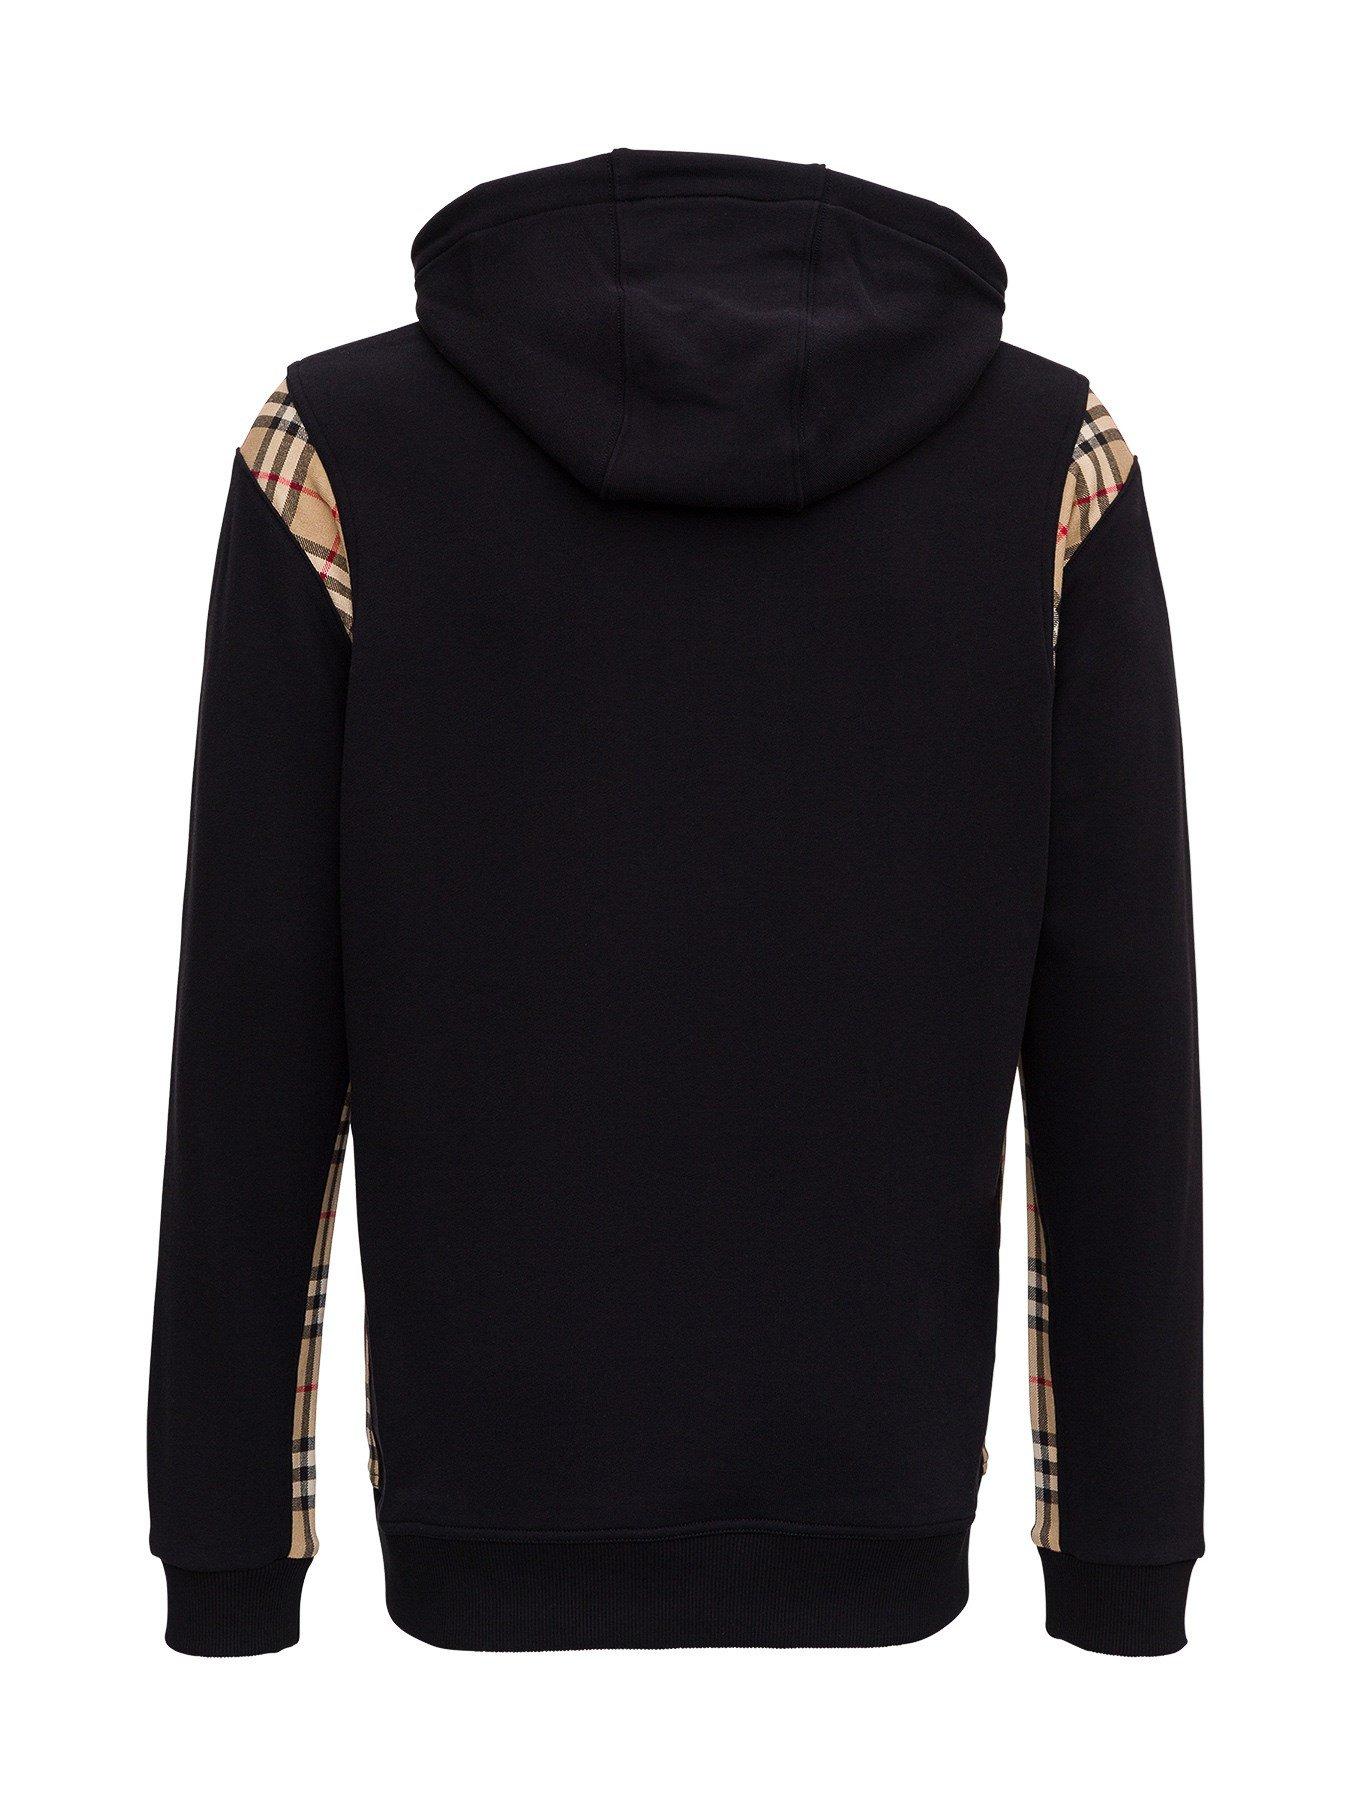 Burberry Vintage Check Panel Cotton Hoodie in Black for Men 